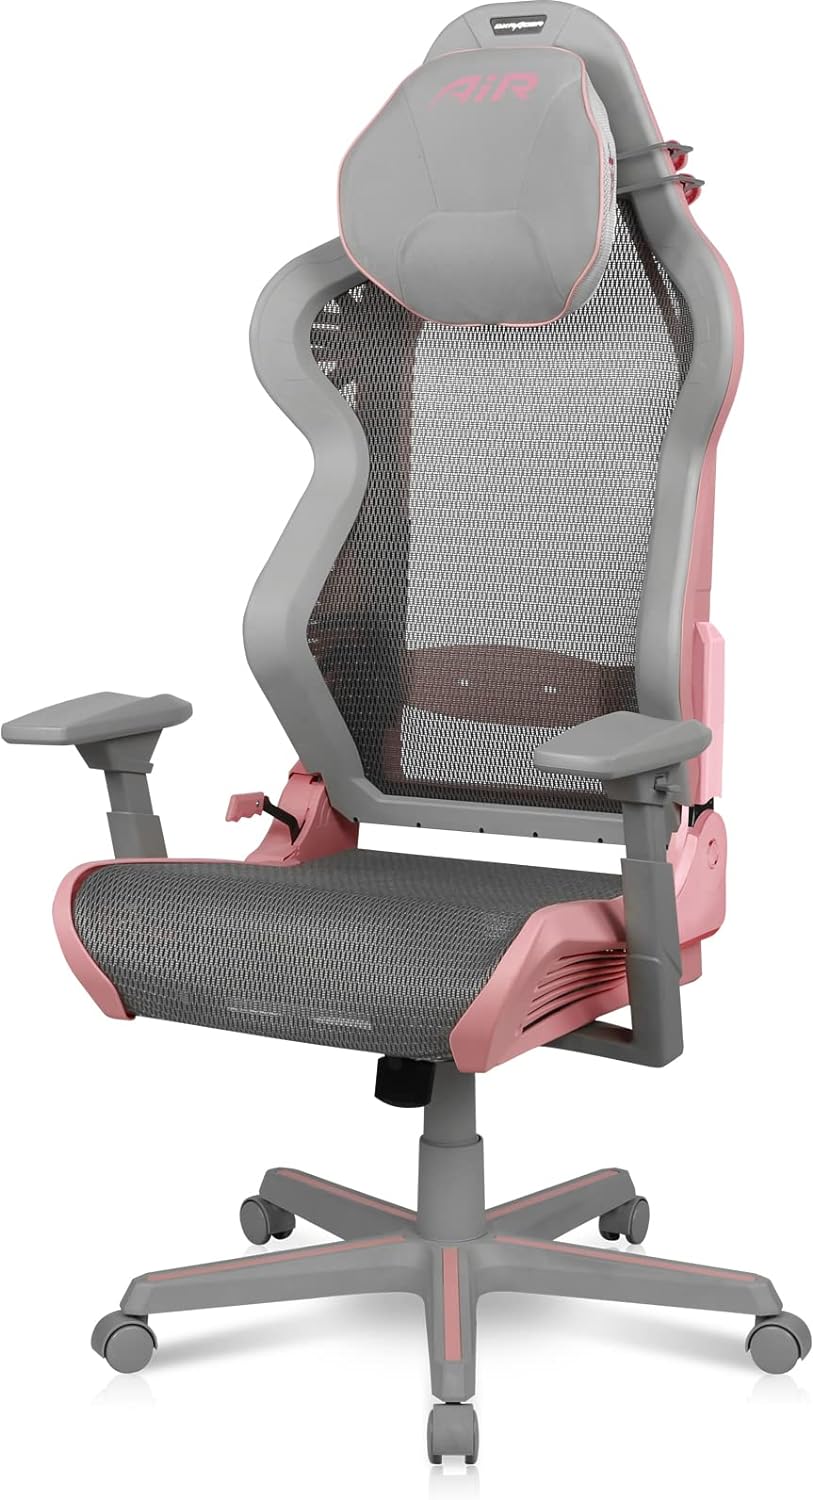 SKU: 0810027590442, Barcode: 810027590442 - DXRacer Air Gaming Chair in Grey & Pink: Memory Foam Headrest for perfect neck support and comfort.